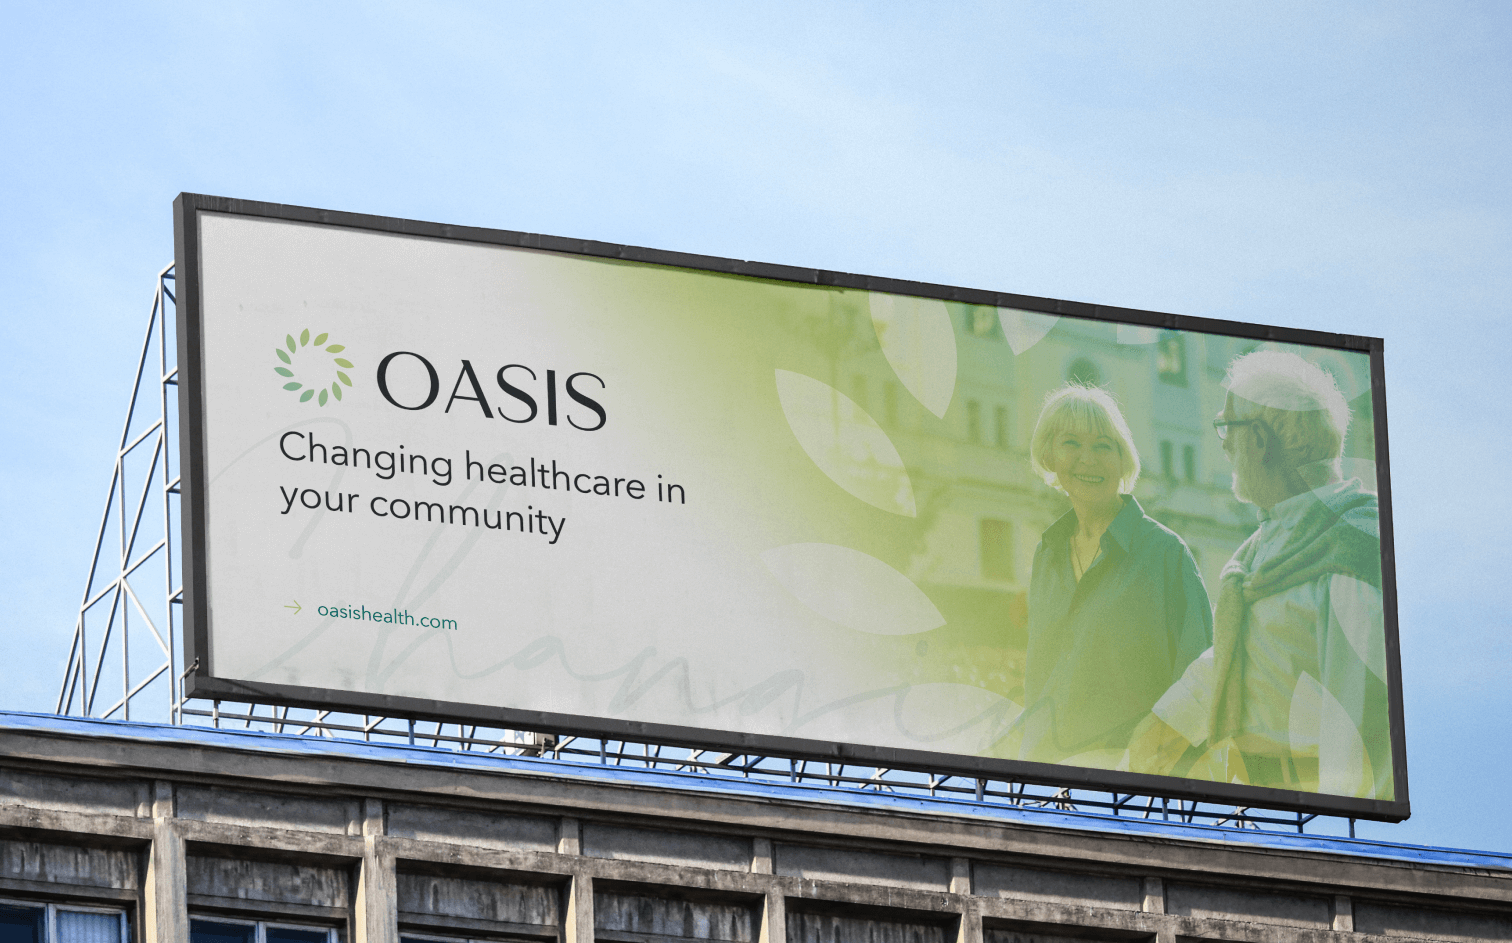 oasis health care banner image